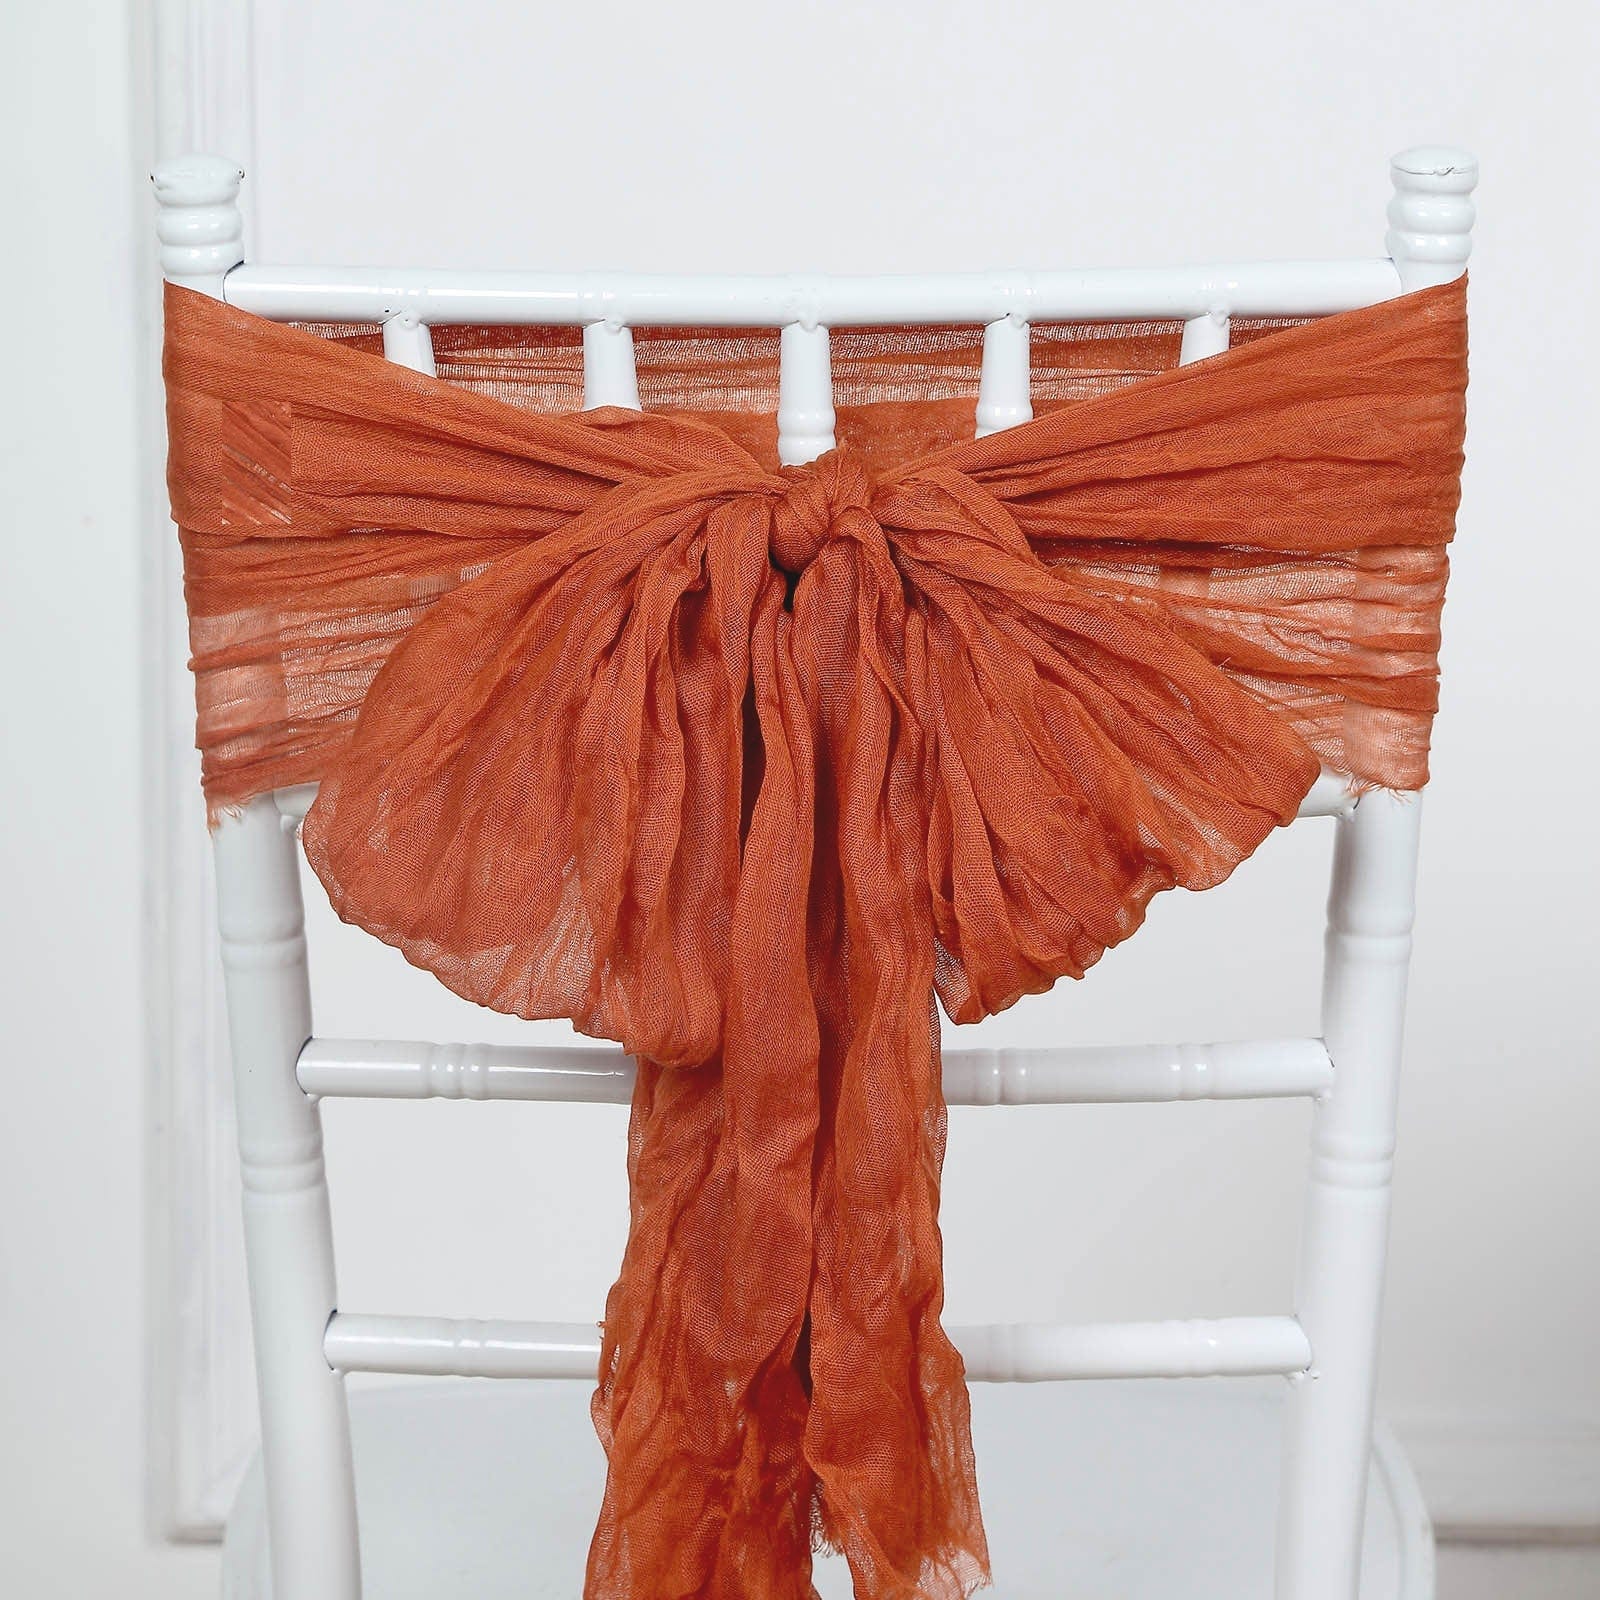 5 Gauze Cheesecloth Cotton Chair Sashes